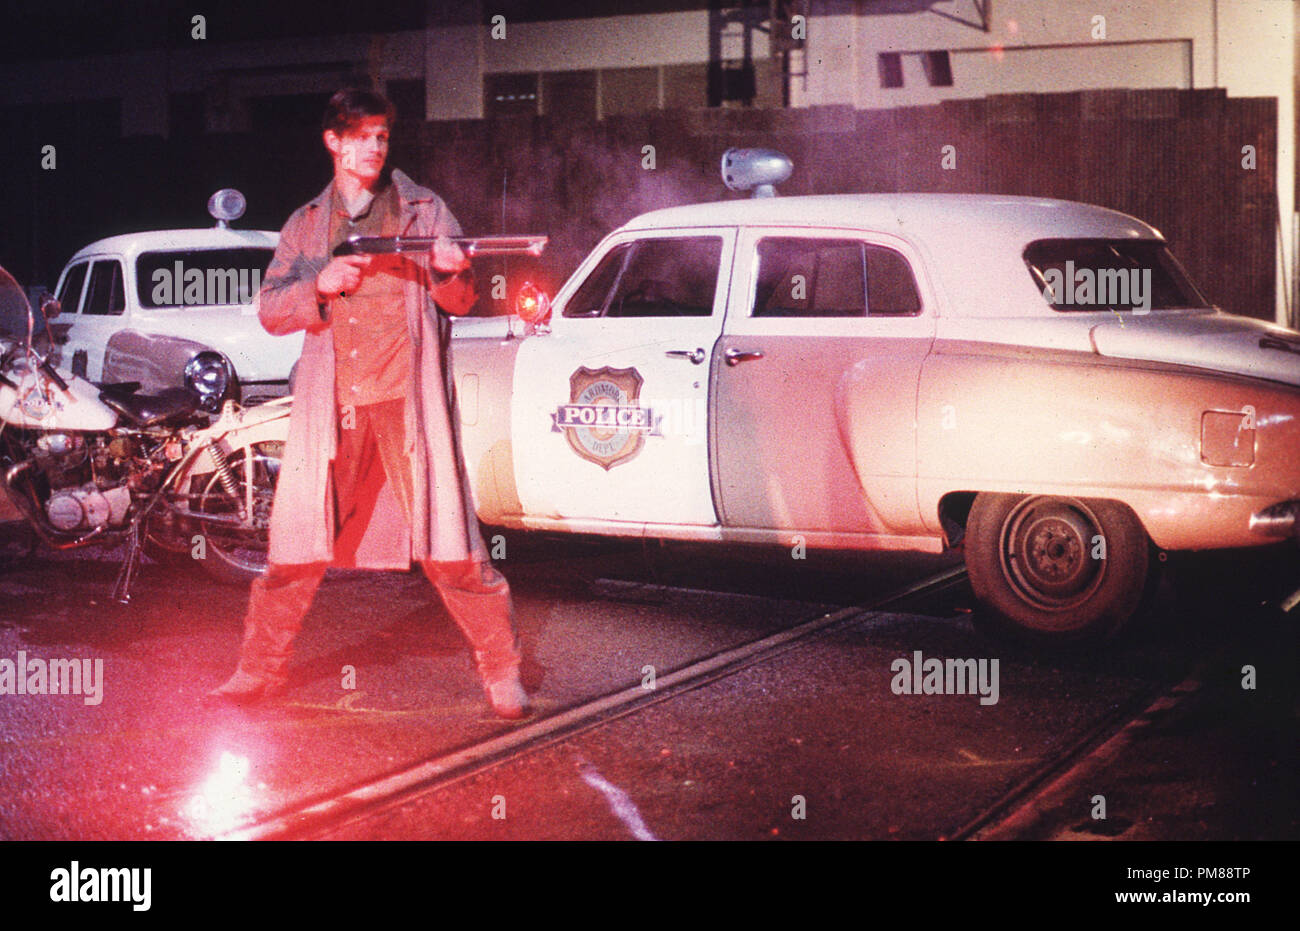 Studio Publicity Still from "Streets of Fire" Michael Pare  © 1984 Universal Photo Credit: Stephen Vaughan  All Rights Reserved   File Reference # 31706133THA  For Editorial Use Only Stock Photo